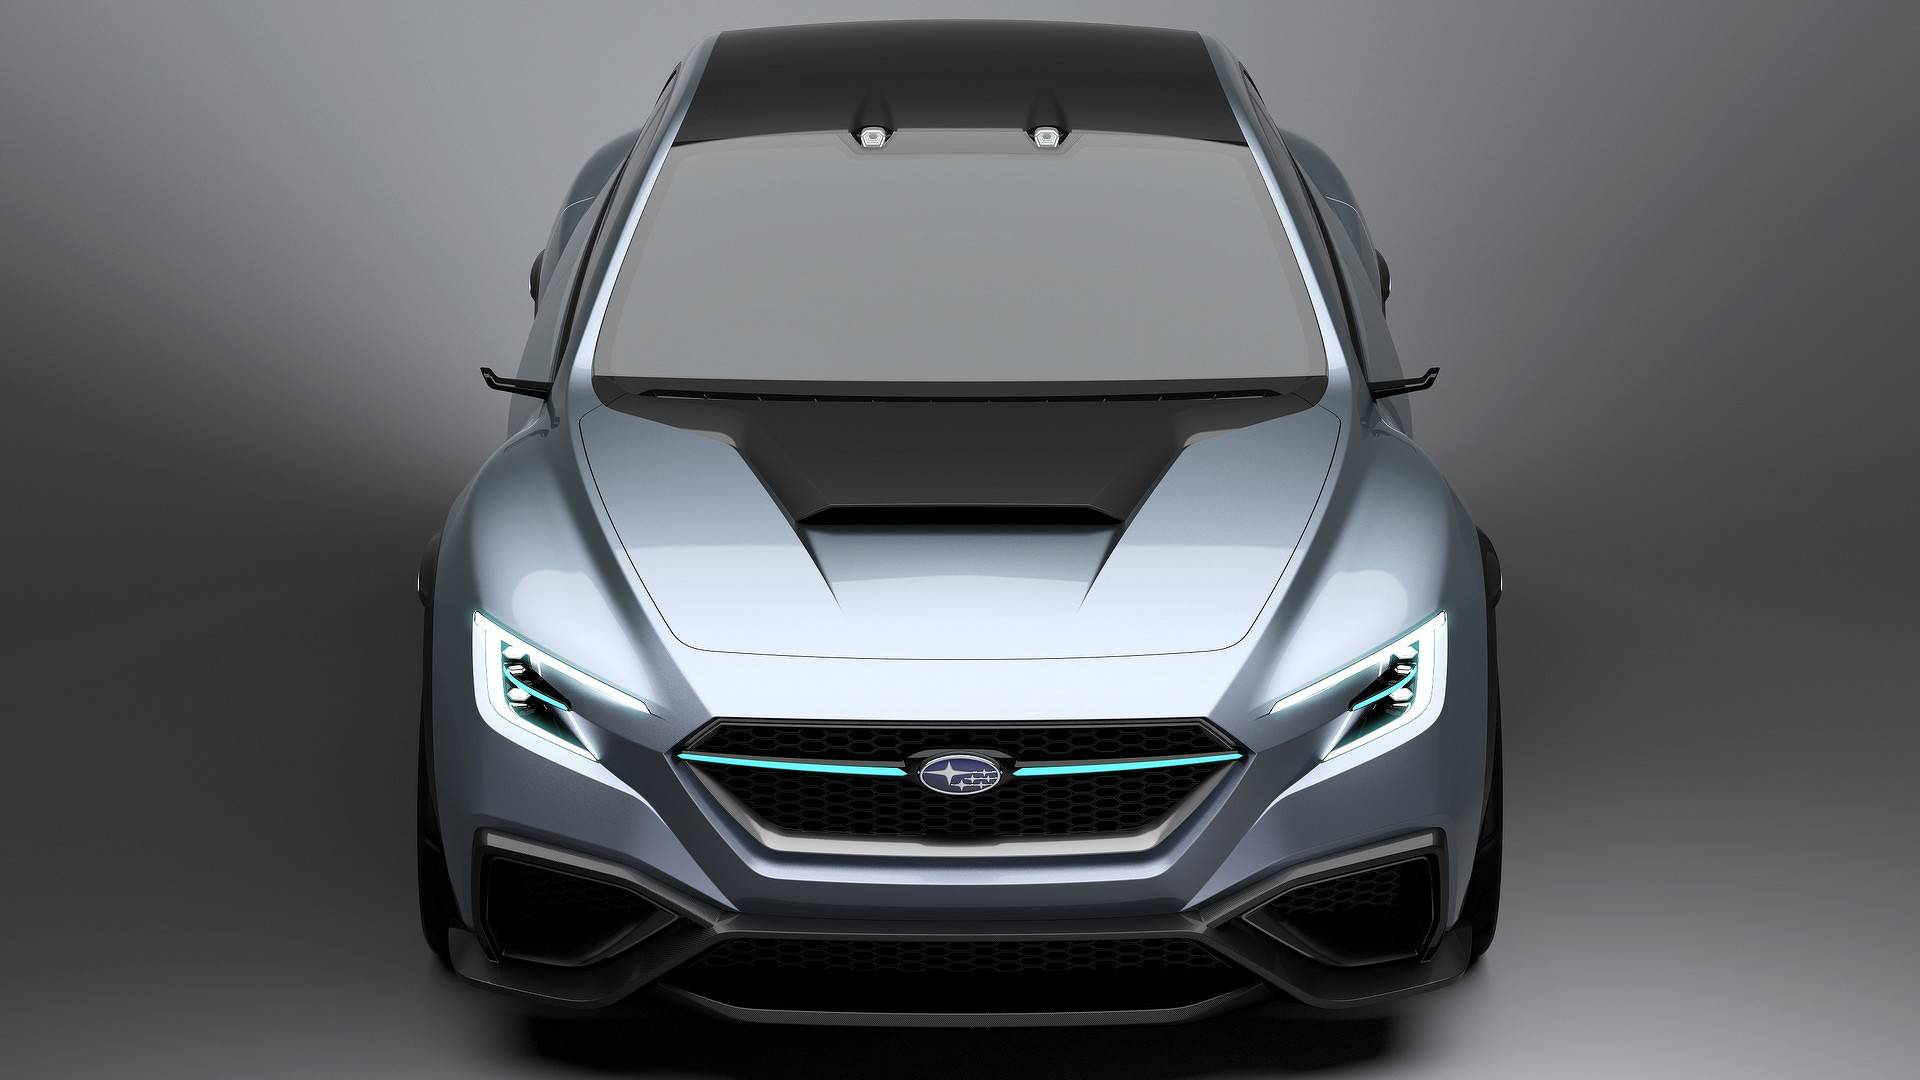 Subaru Electric Vehicles Coming In 2021, PHEV In 2018 - autoevolution